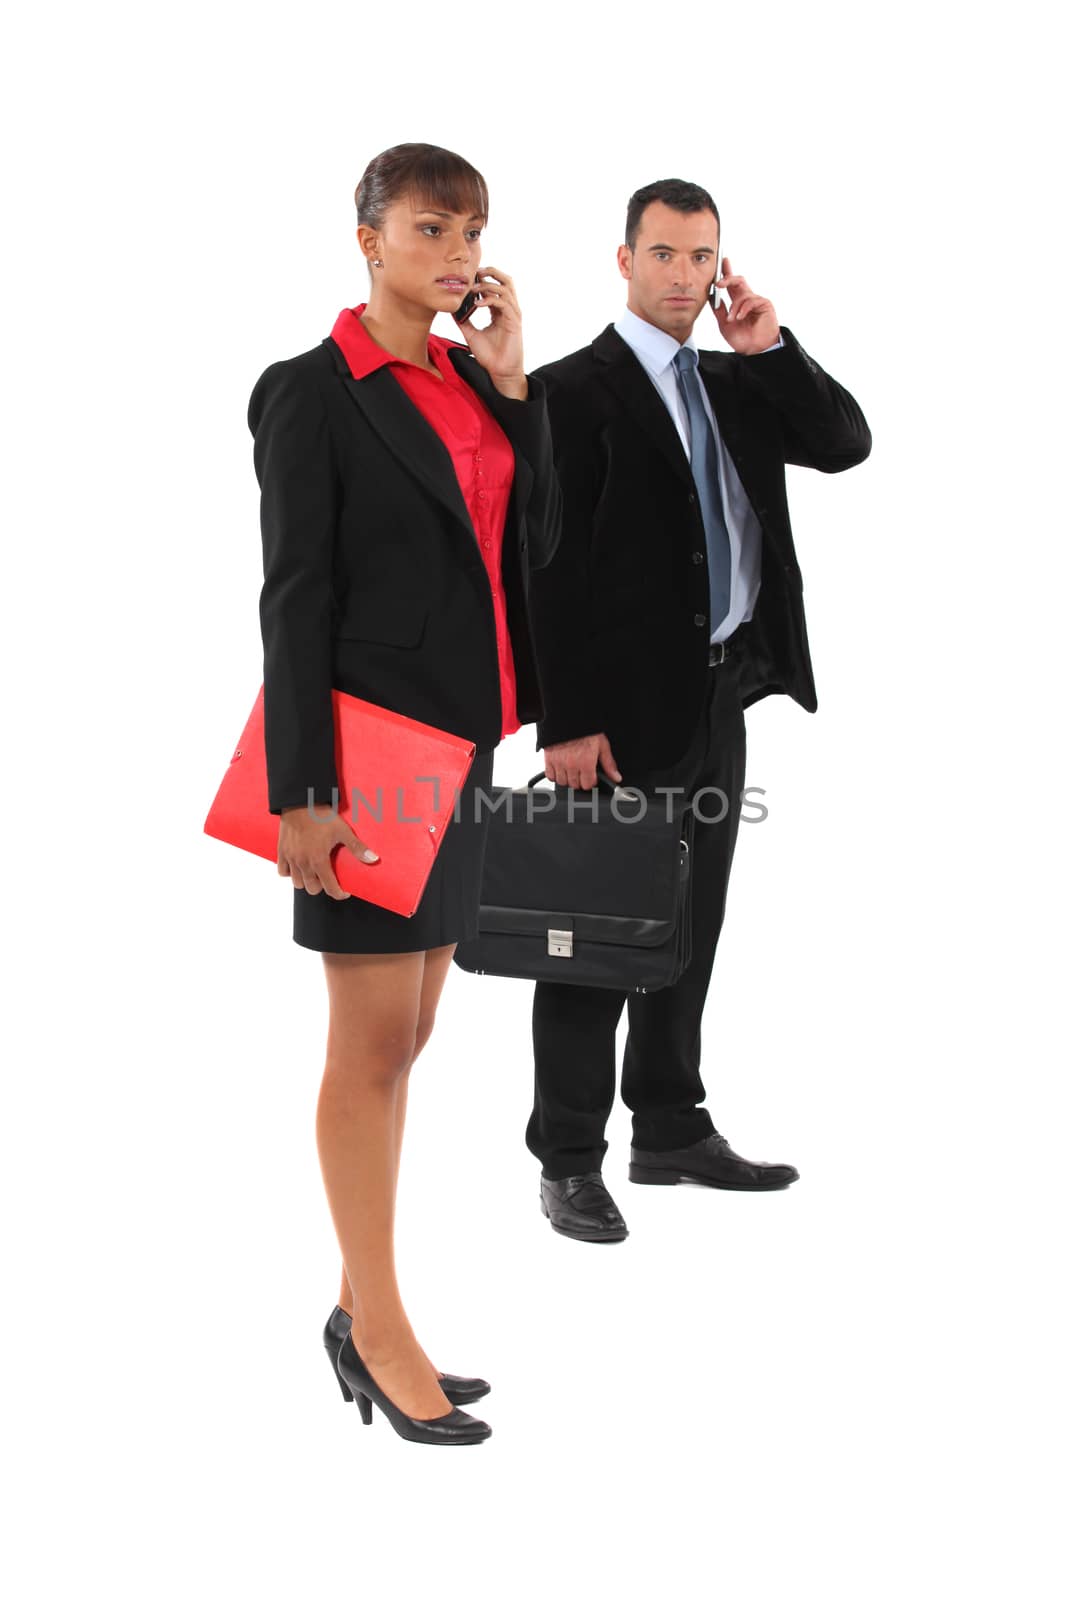 Couple of executives at the phone